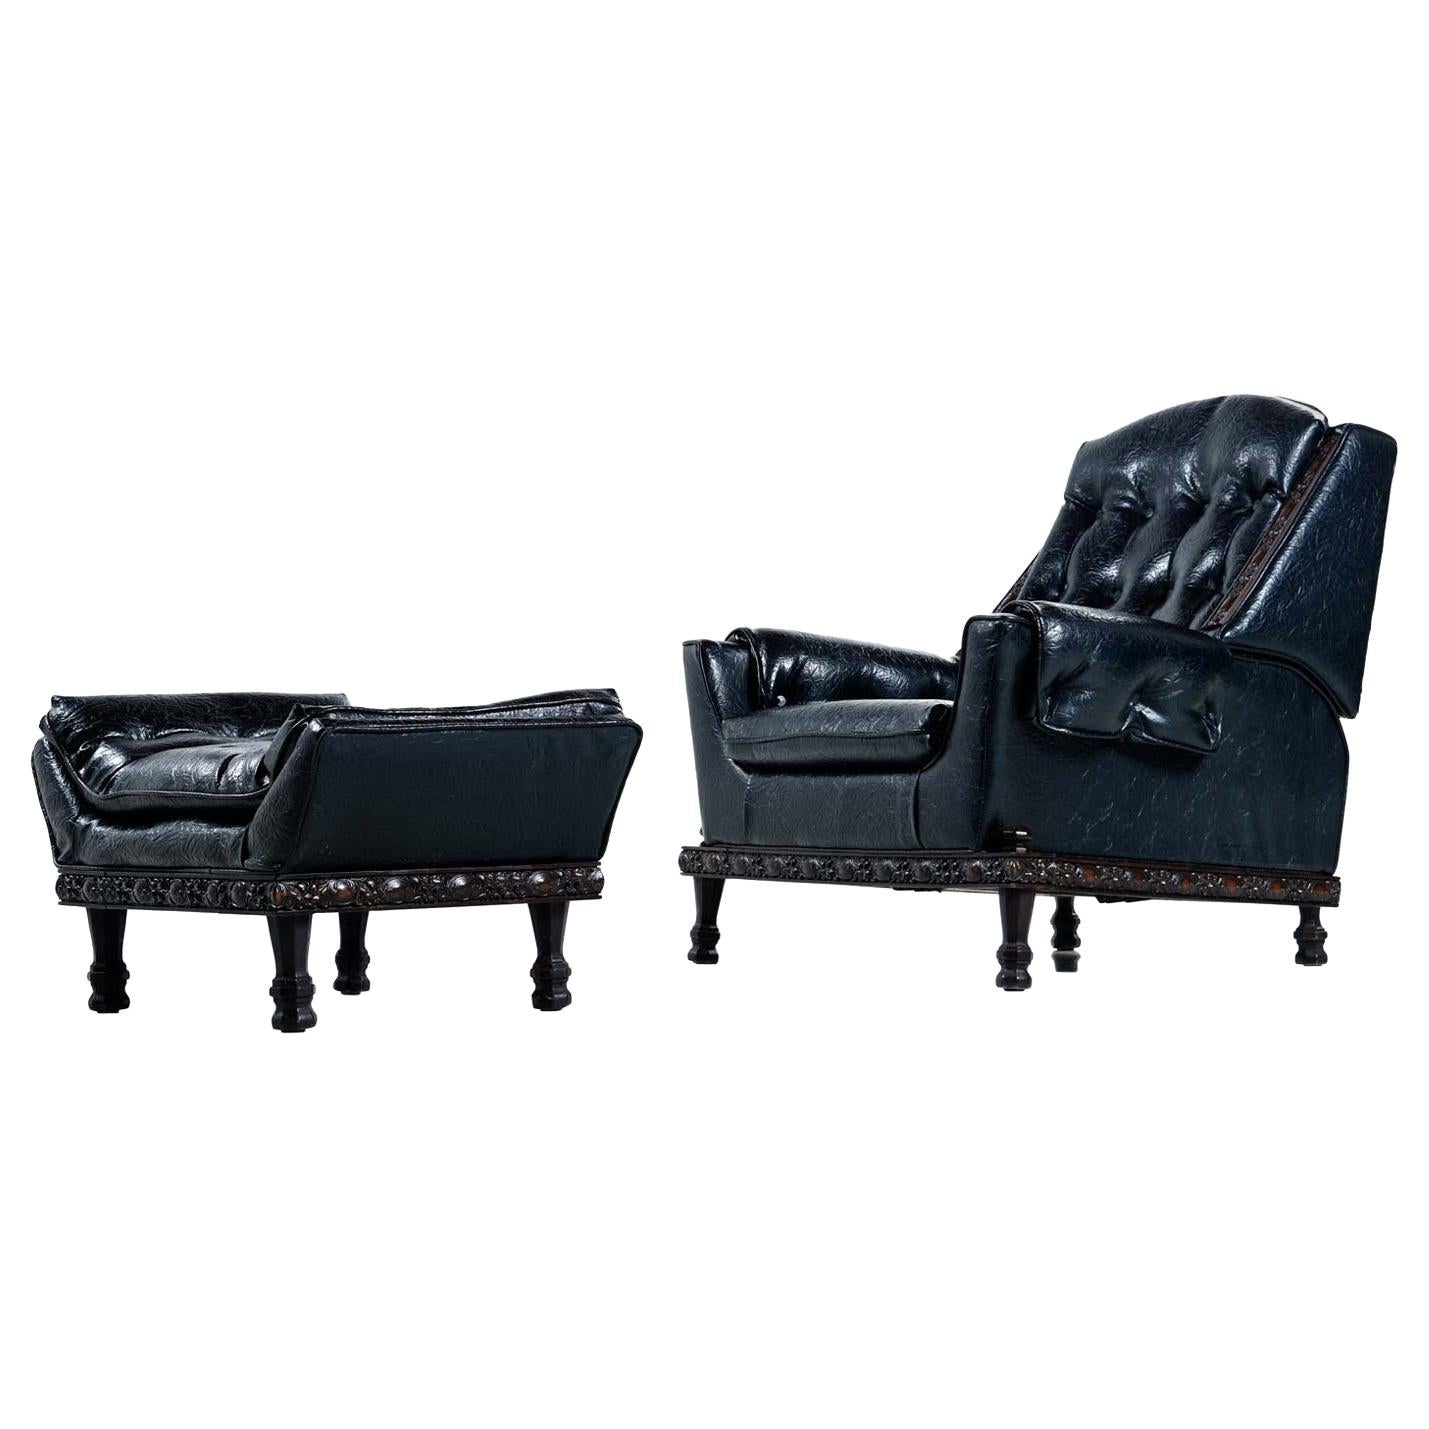 Spanish Meditteranean Style Black Tufted Vinyl Recliner Lounge Chair and Ottoman